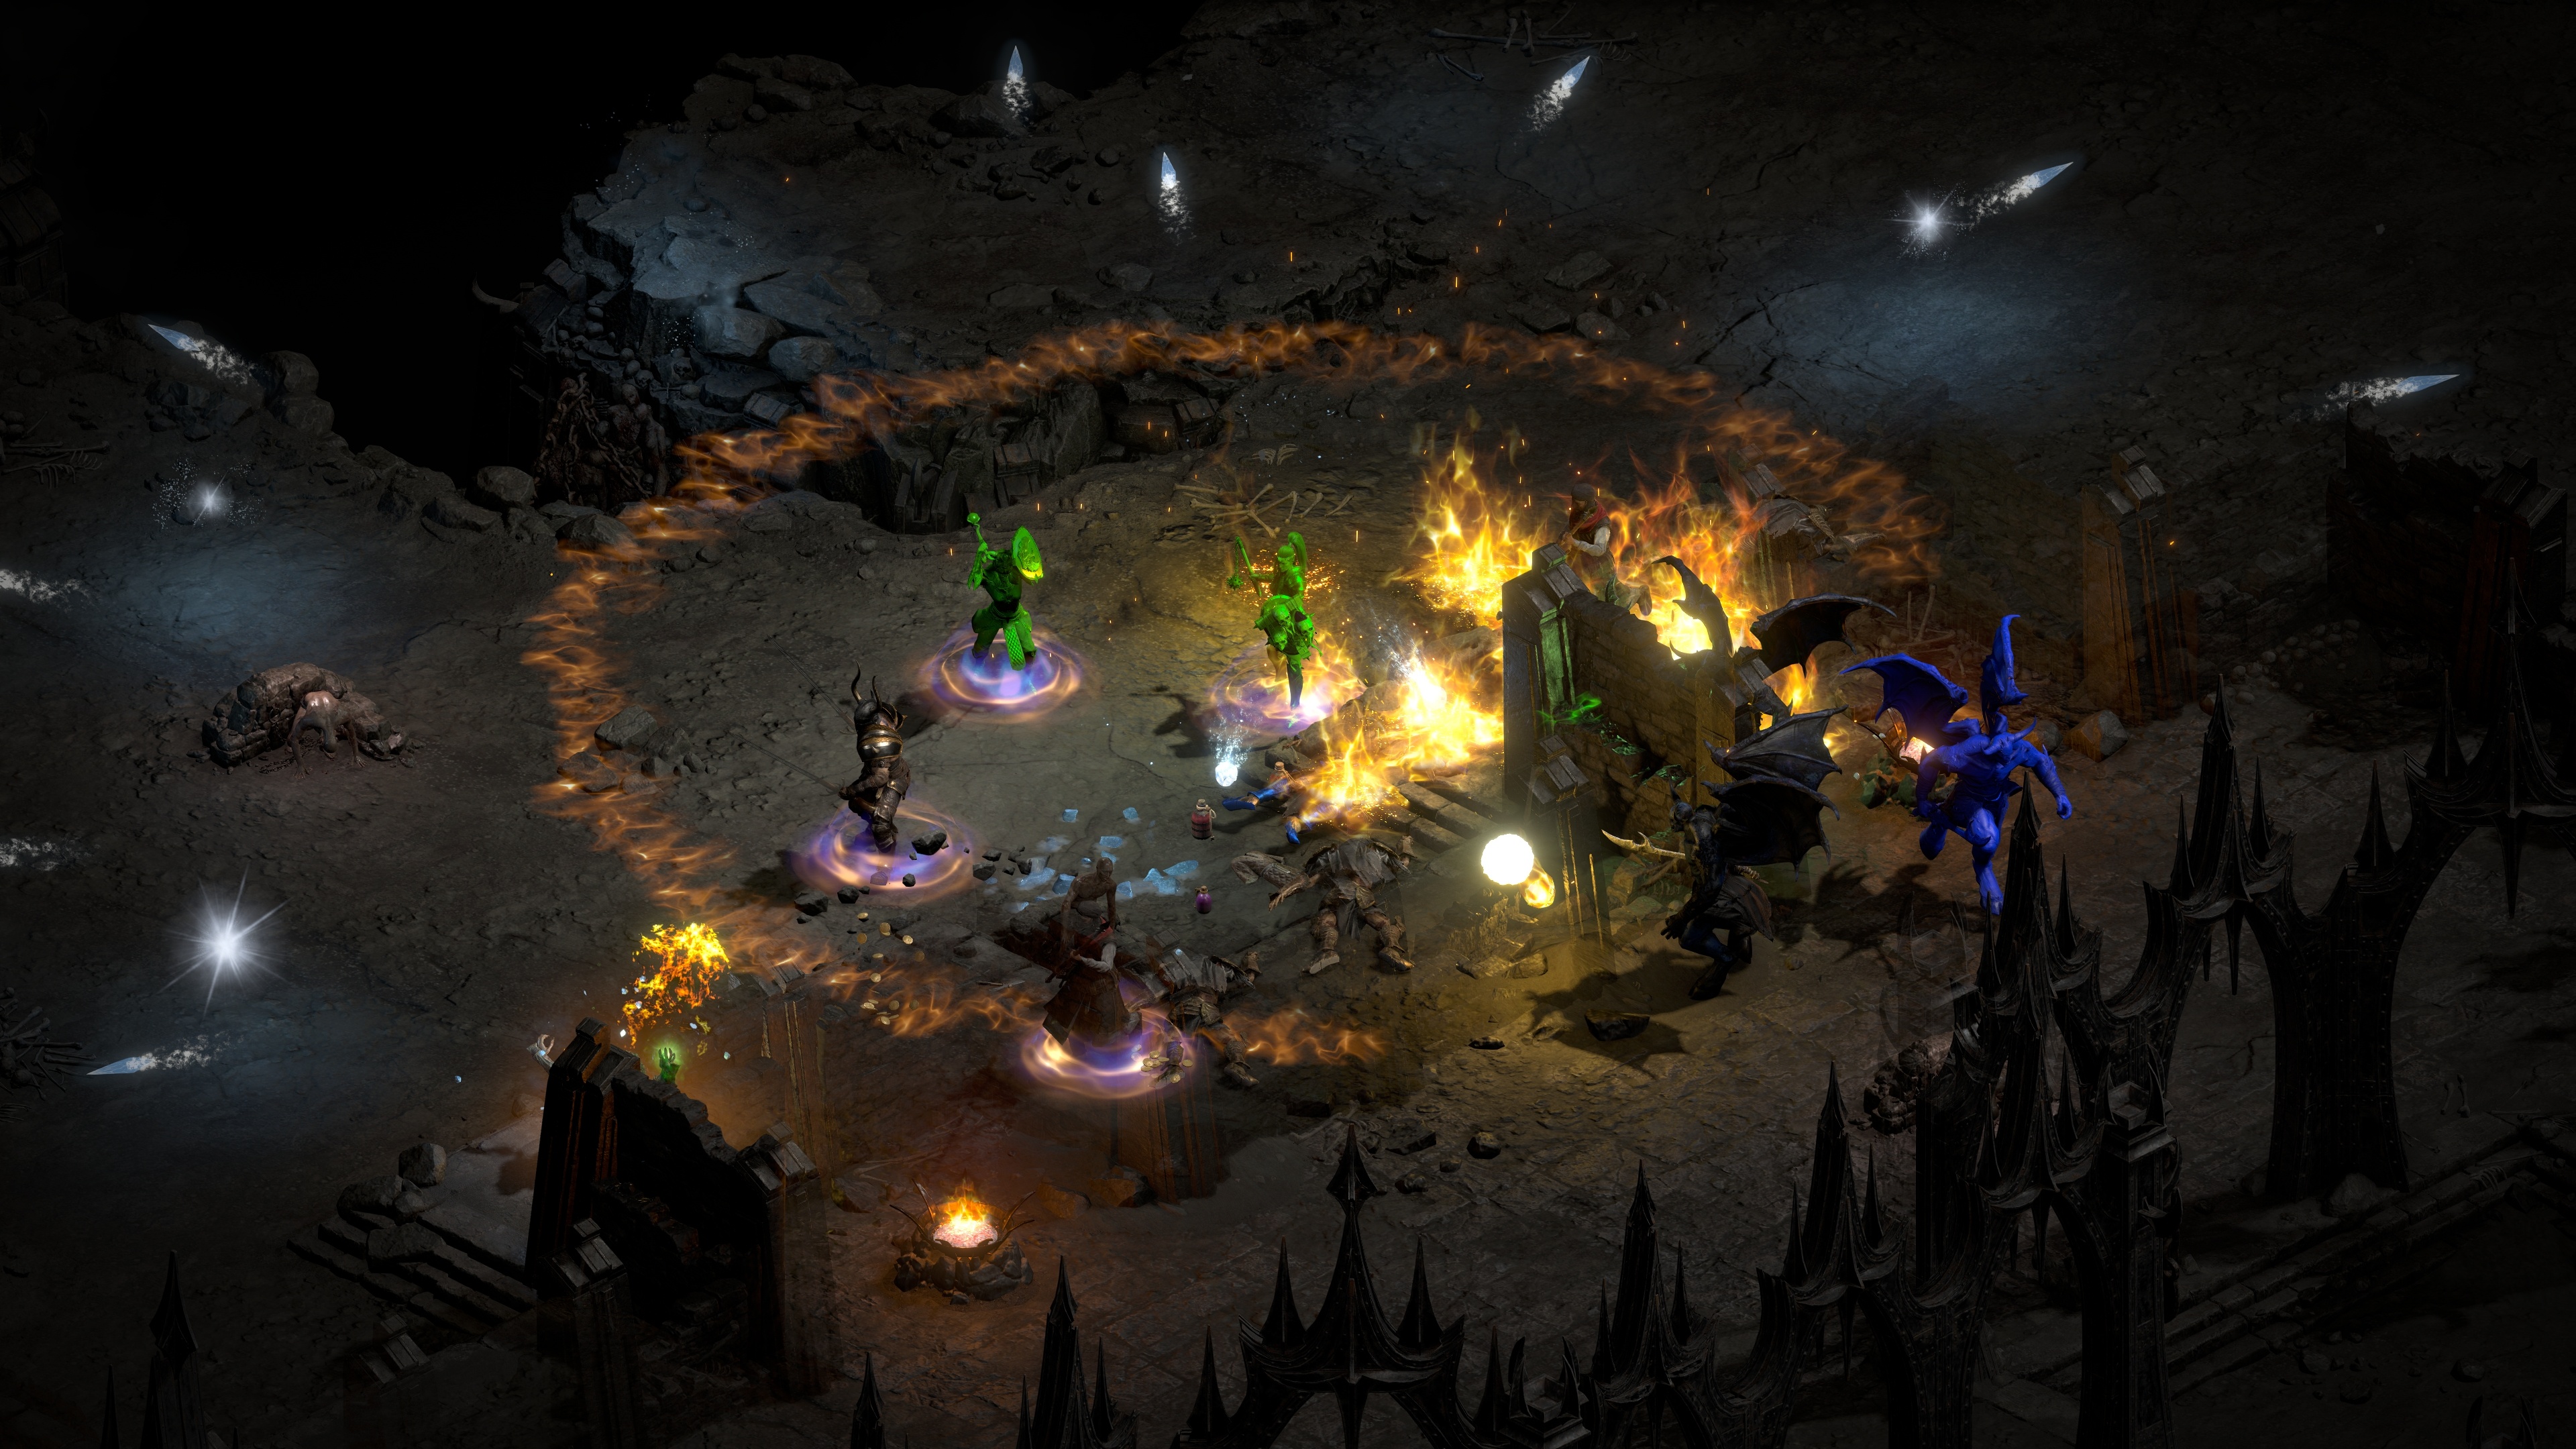 Patch 2.7 Patch Notes Released, Season 4 Starts May 4 - Diablo II:  Resurrected - Wowhead News